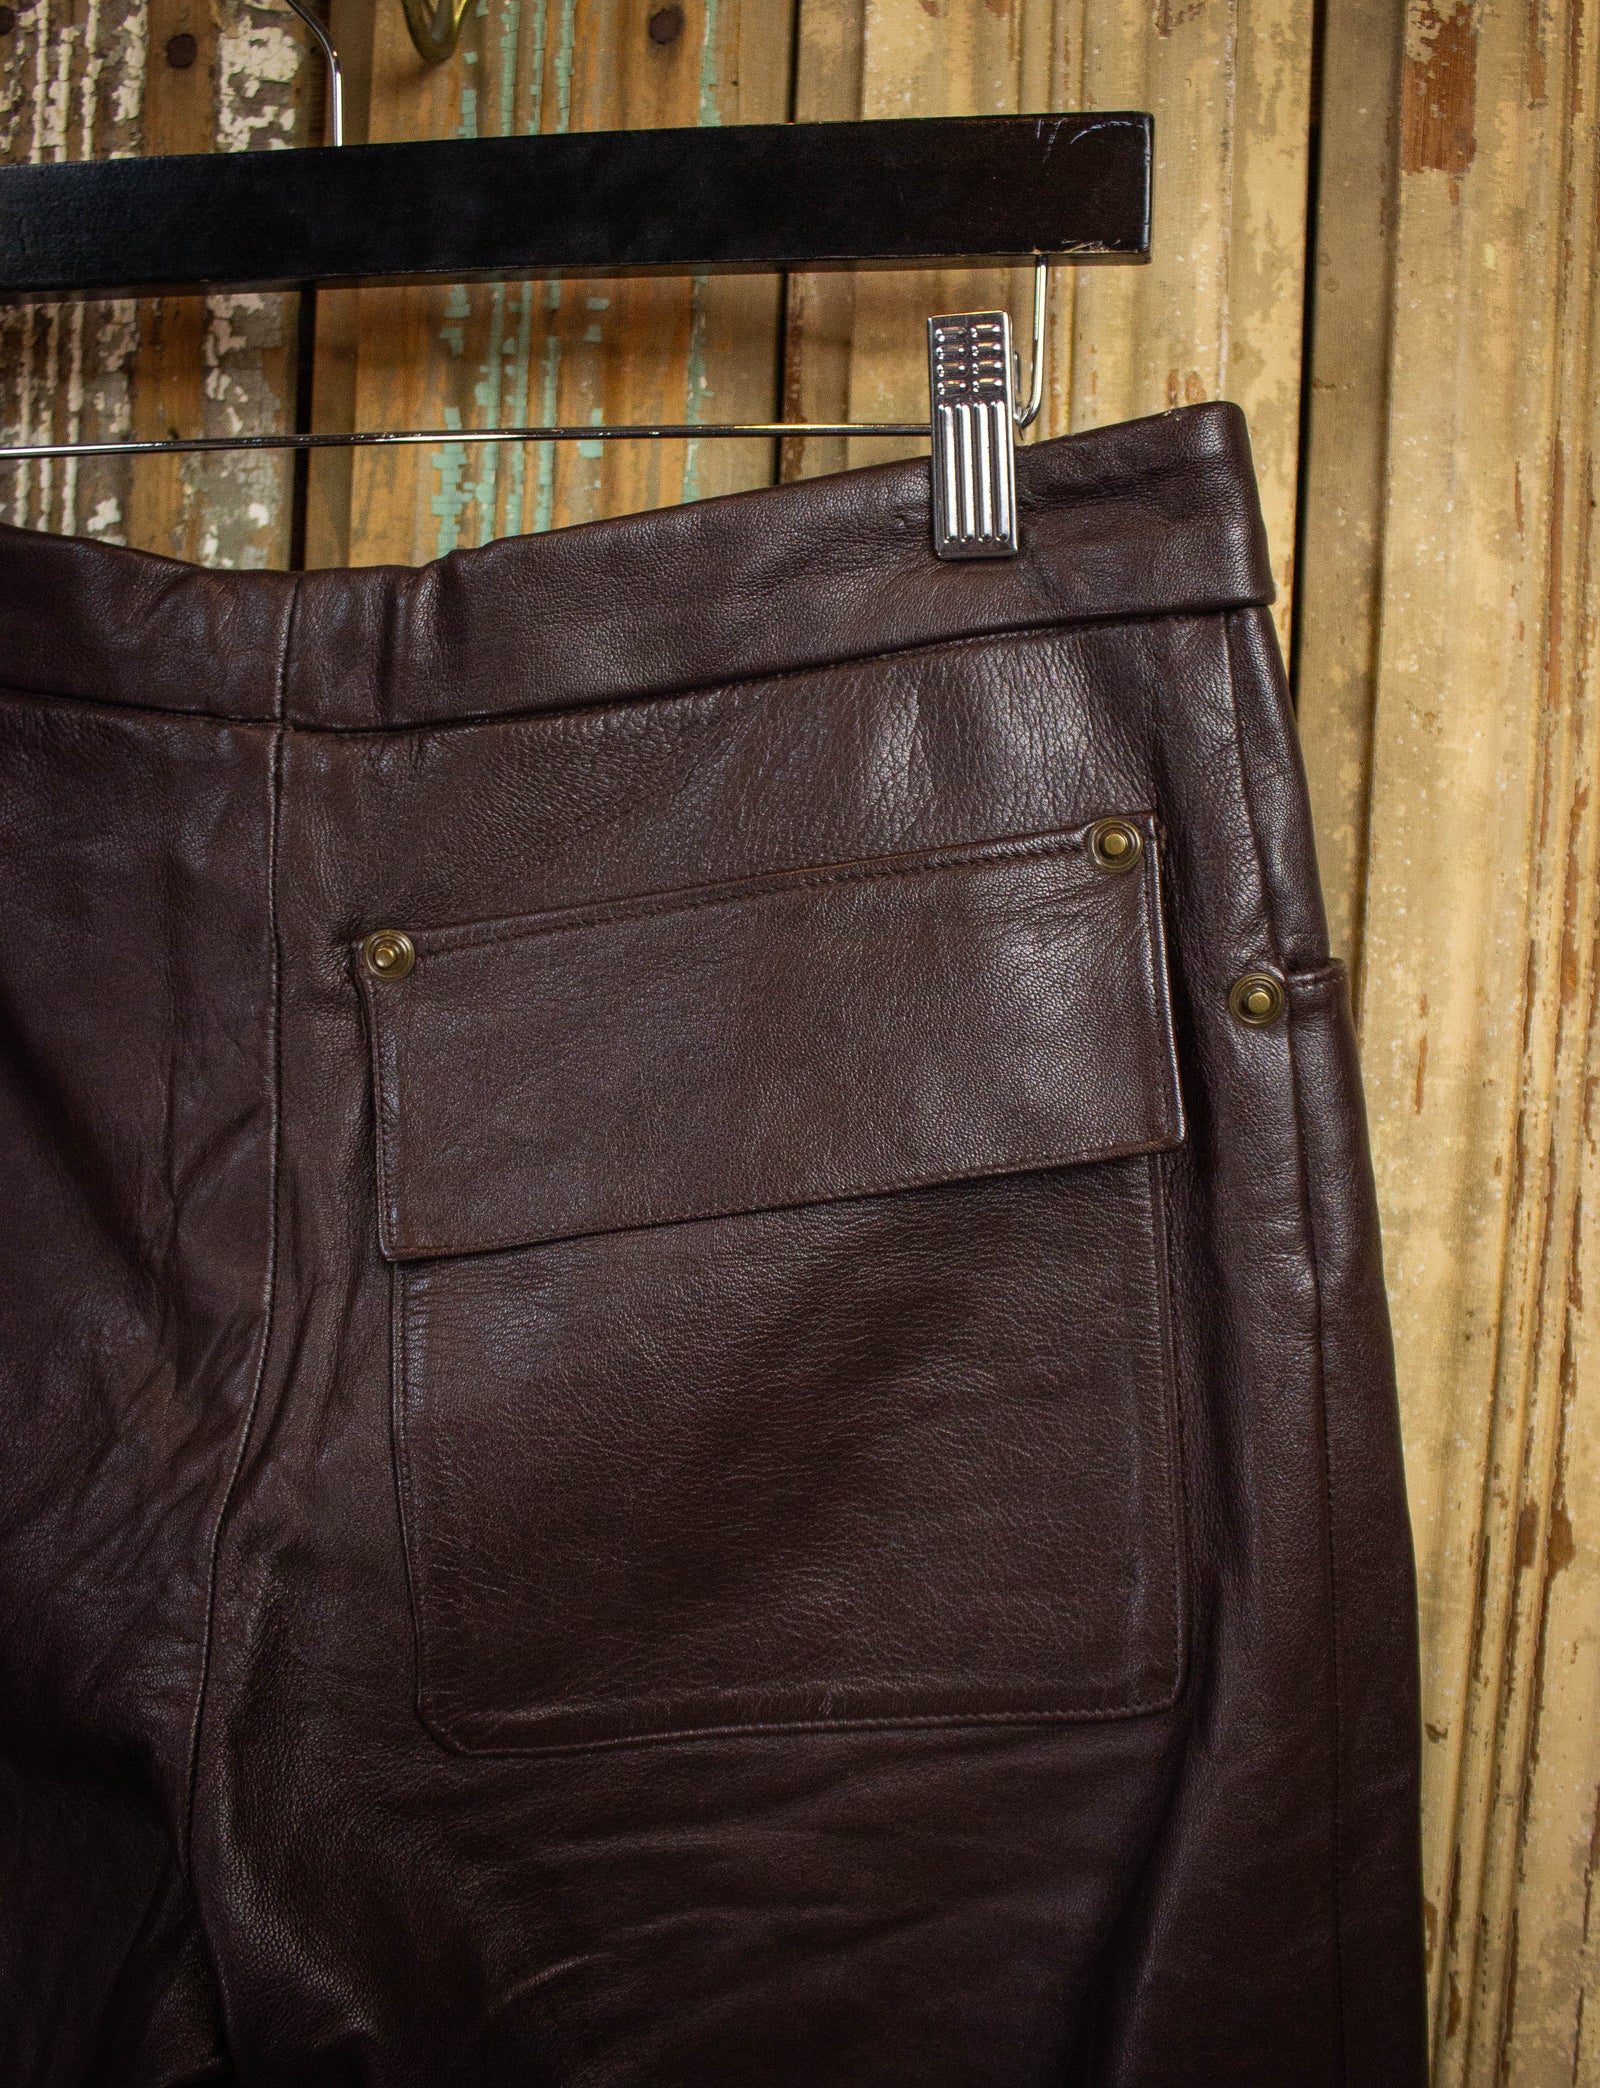 Vintage Brown Leather Shorts 30w